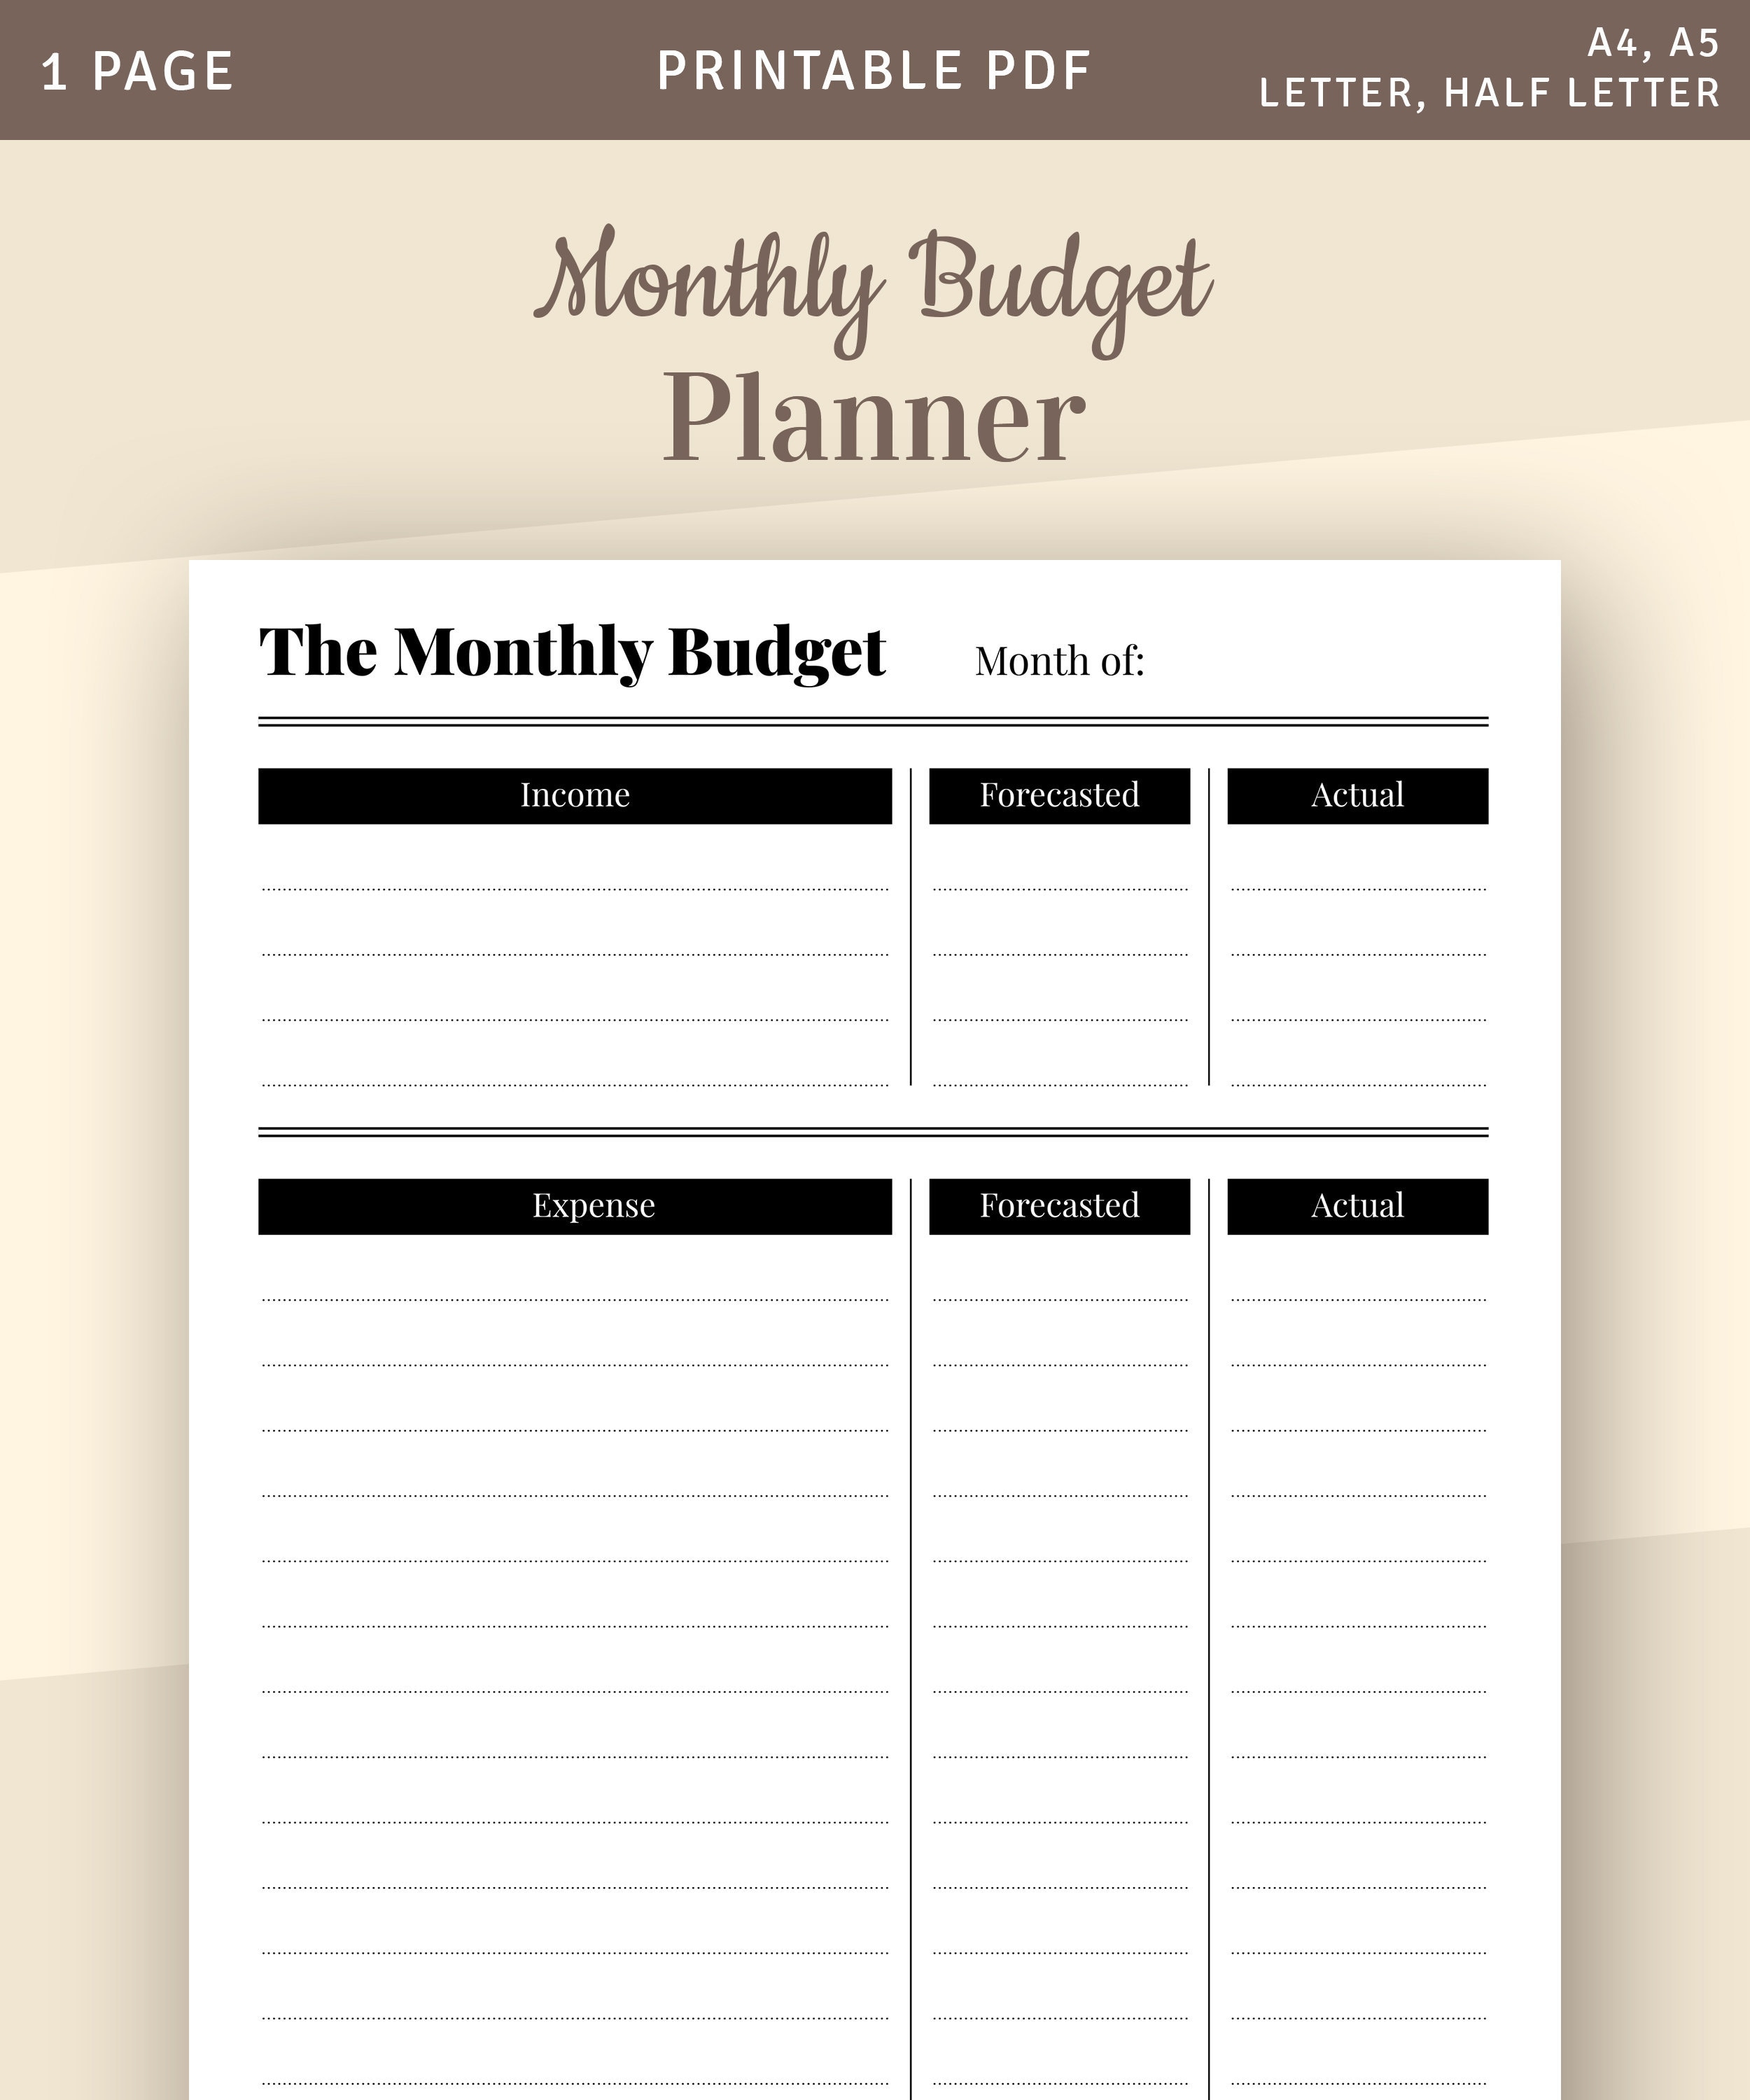 Personal Shopper Business Budget Planner: 8.5 x 11 Shopping Stylist One  Year (12 Month) Organizer to Record Monthly Business Budgets, Income